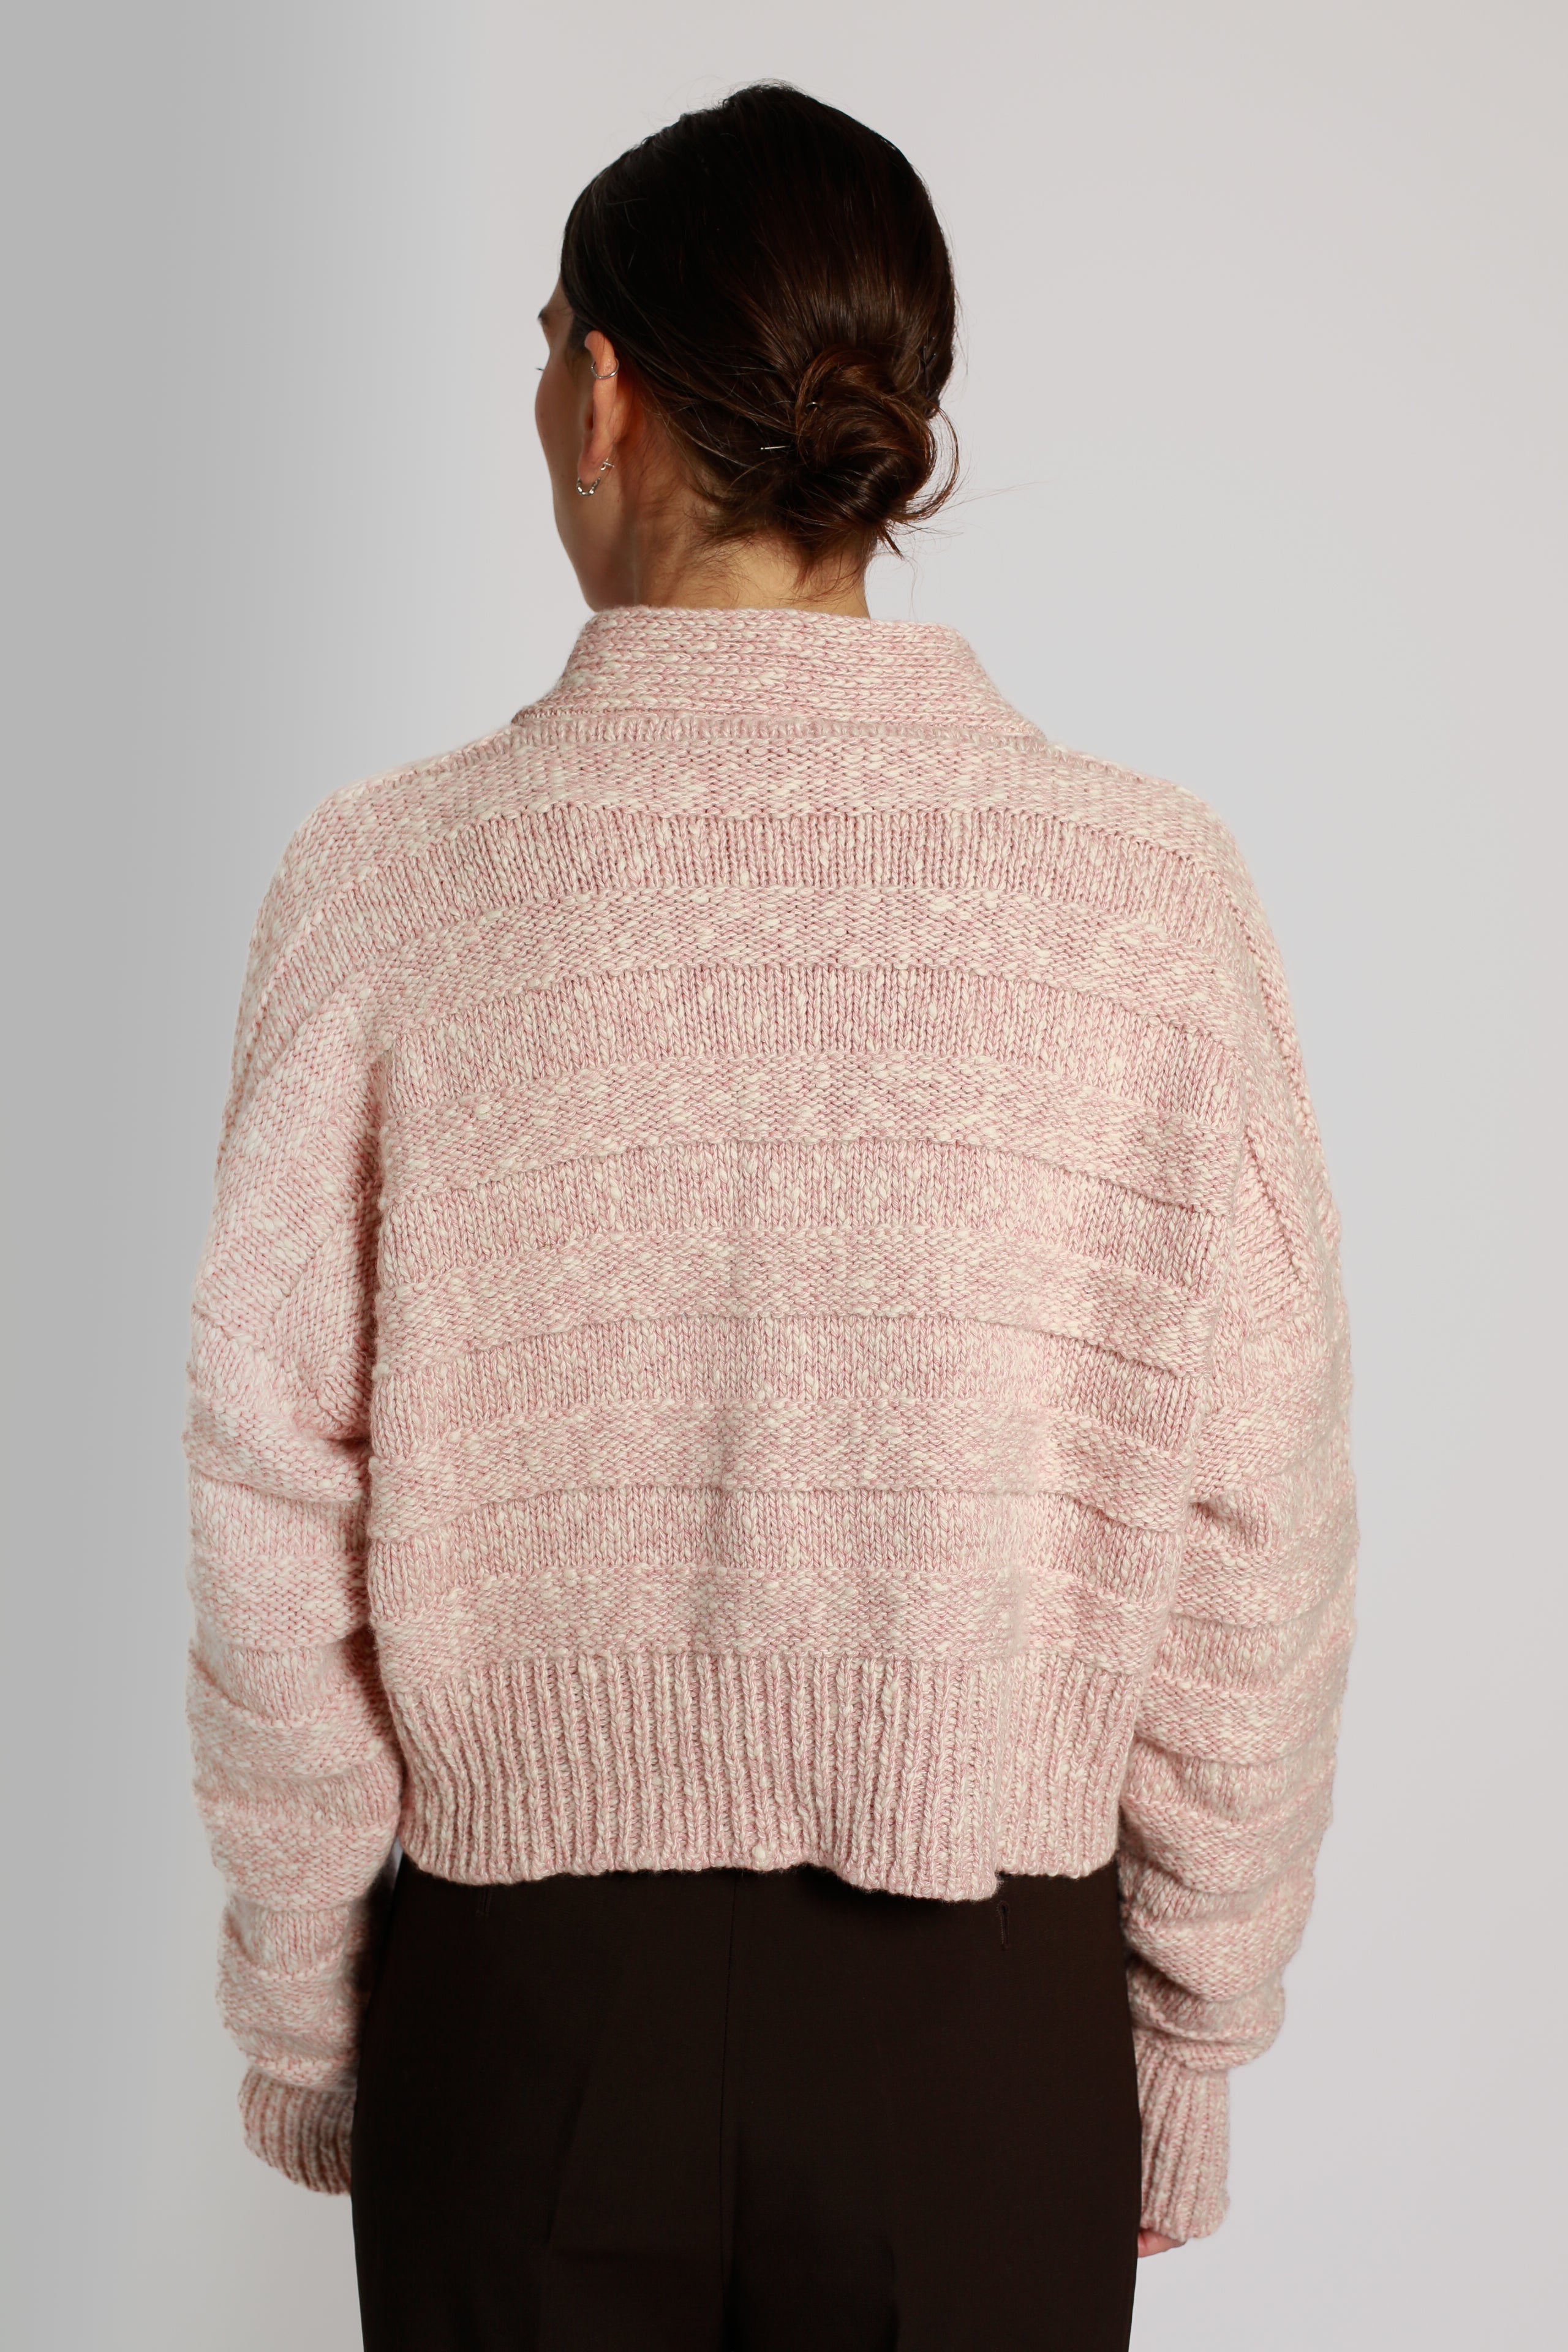 Chiloe cardigan - Made to order